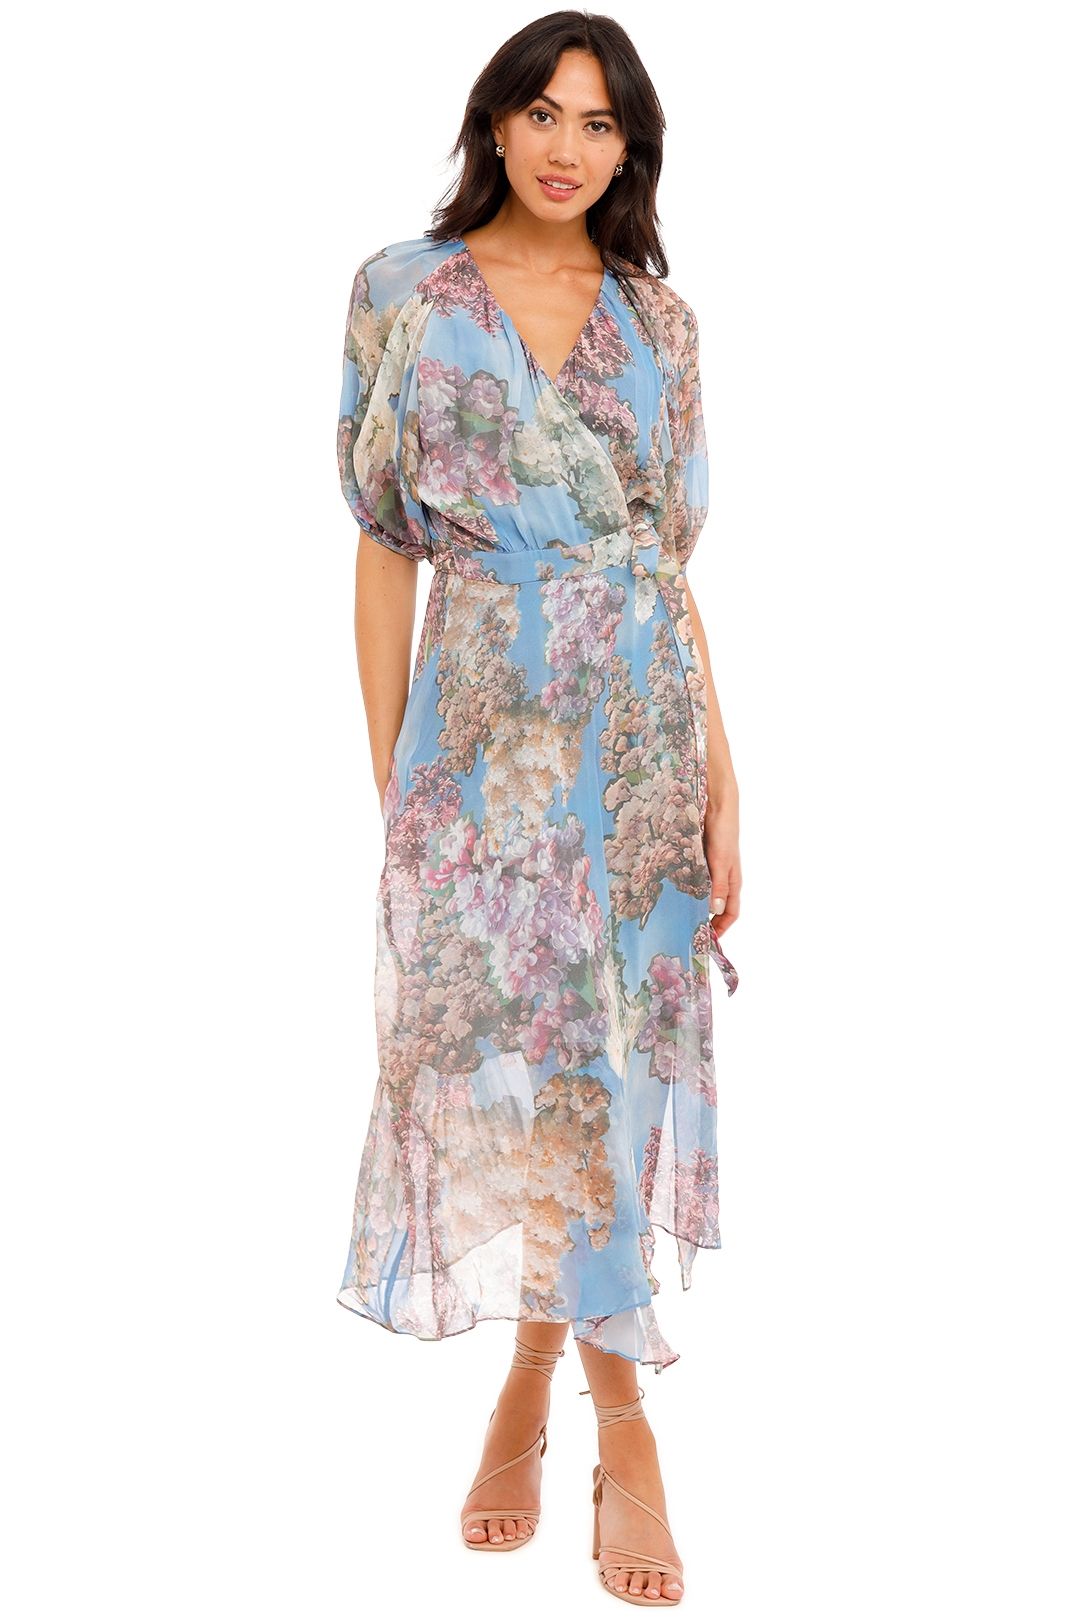 Ginger and Smart New Romantic Wrap Dress blue